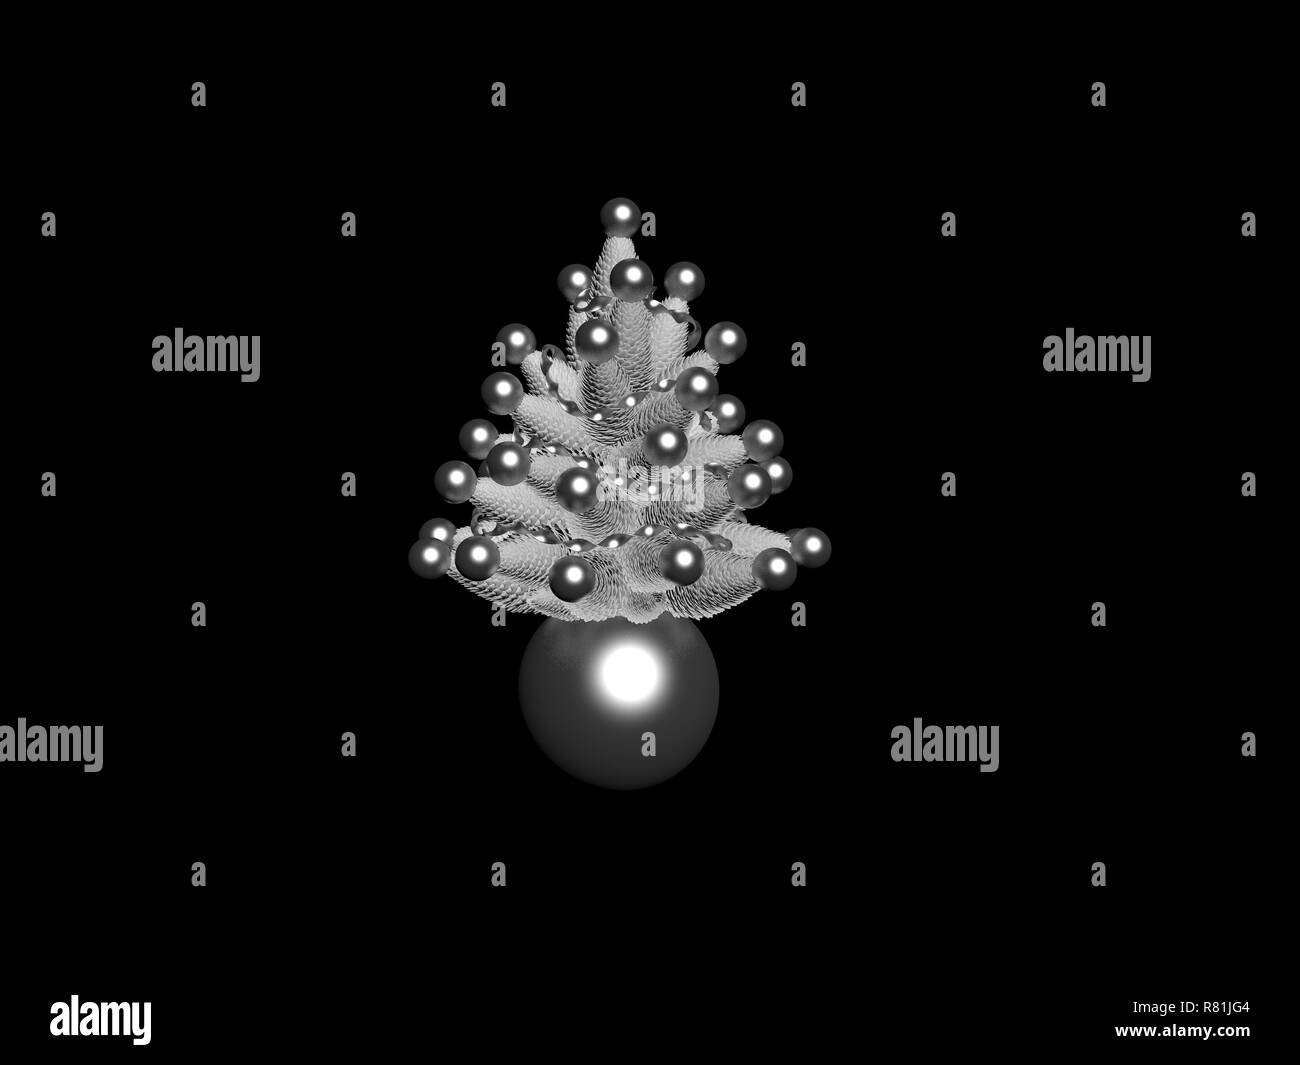 Christmas ornaments decorated Black and White Stock Photos & Images - Alamy